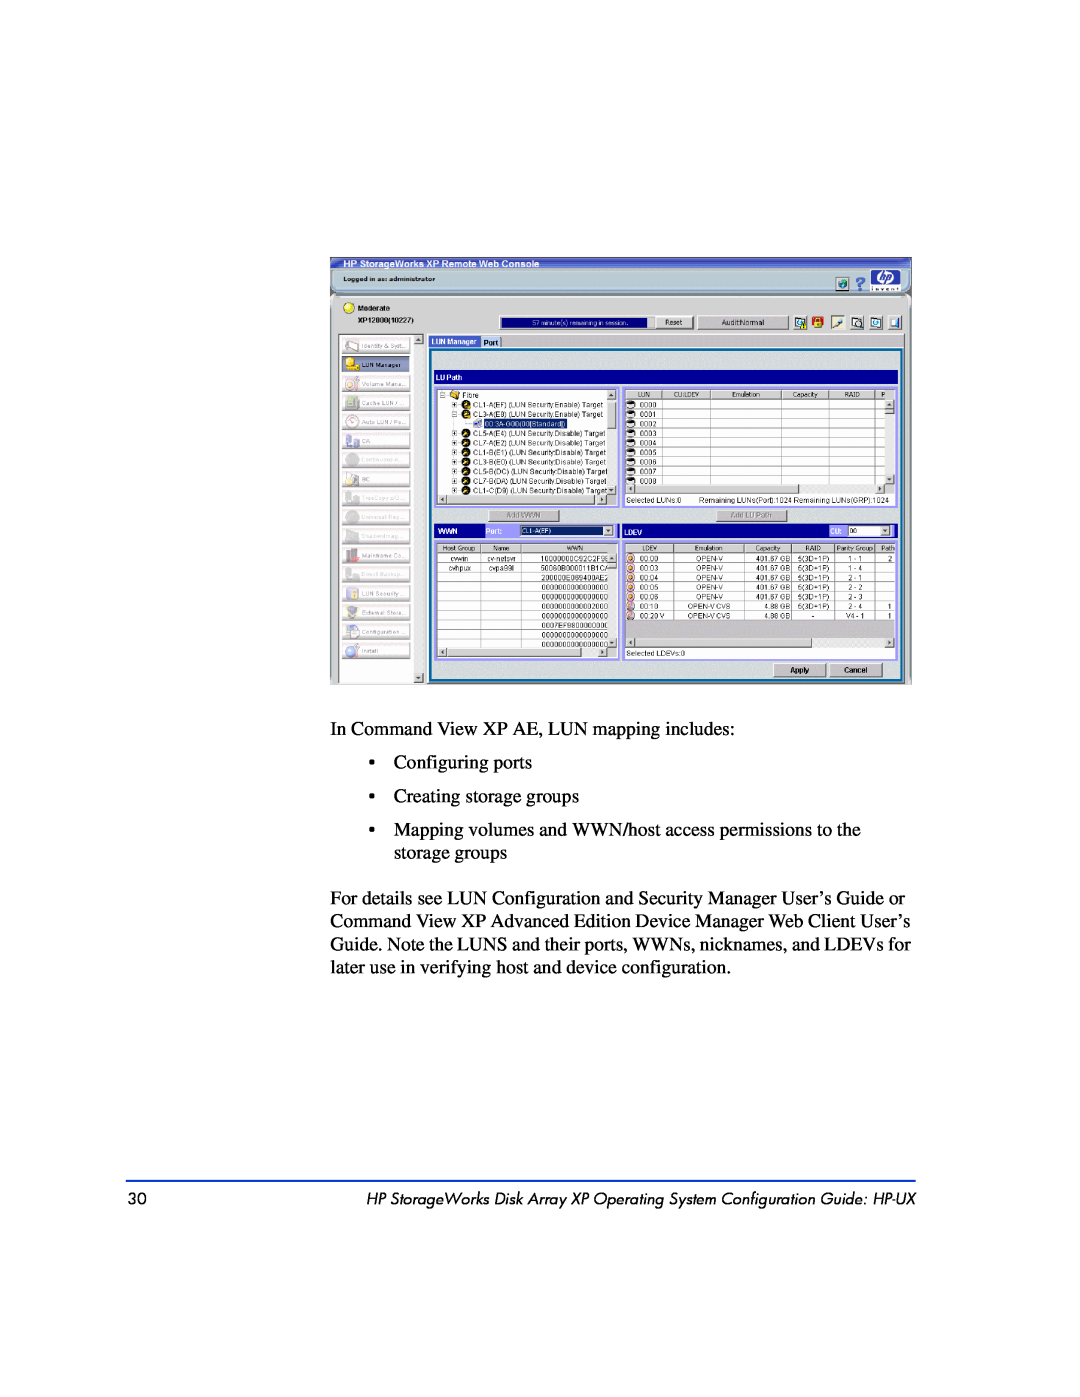 HP XP128, XP10000 manual In Command View XP AE, LUN mapping includes Configuring ports 